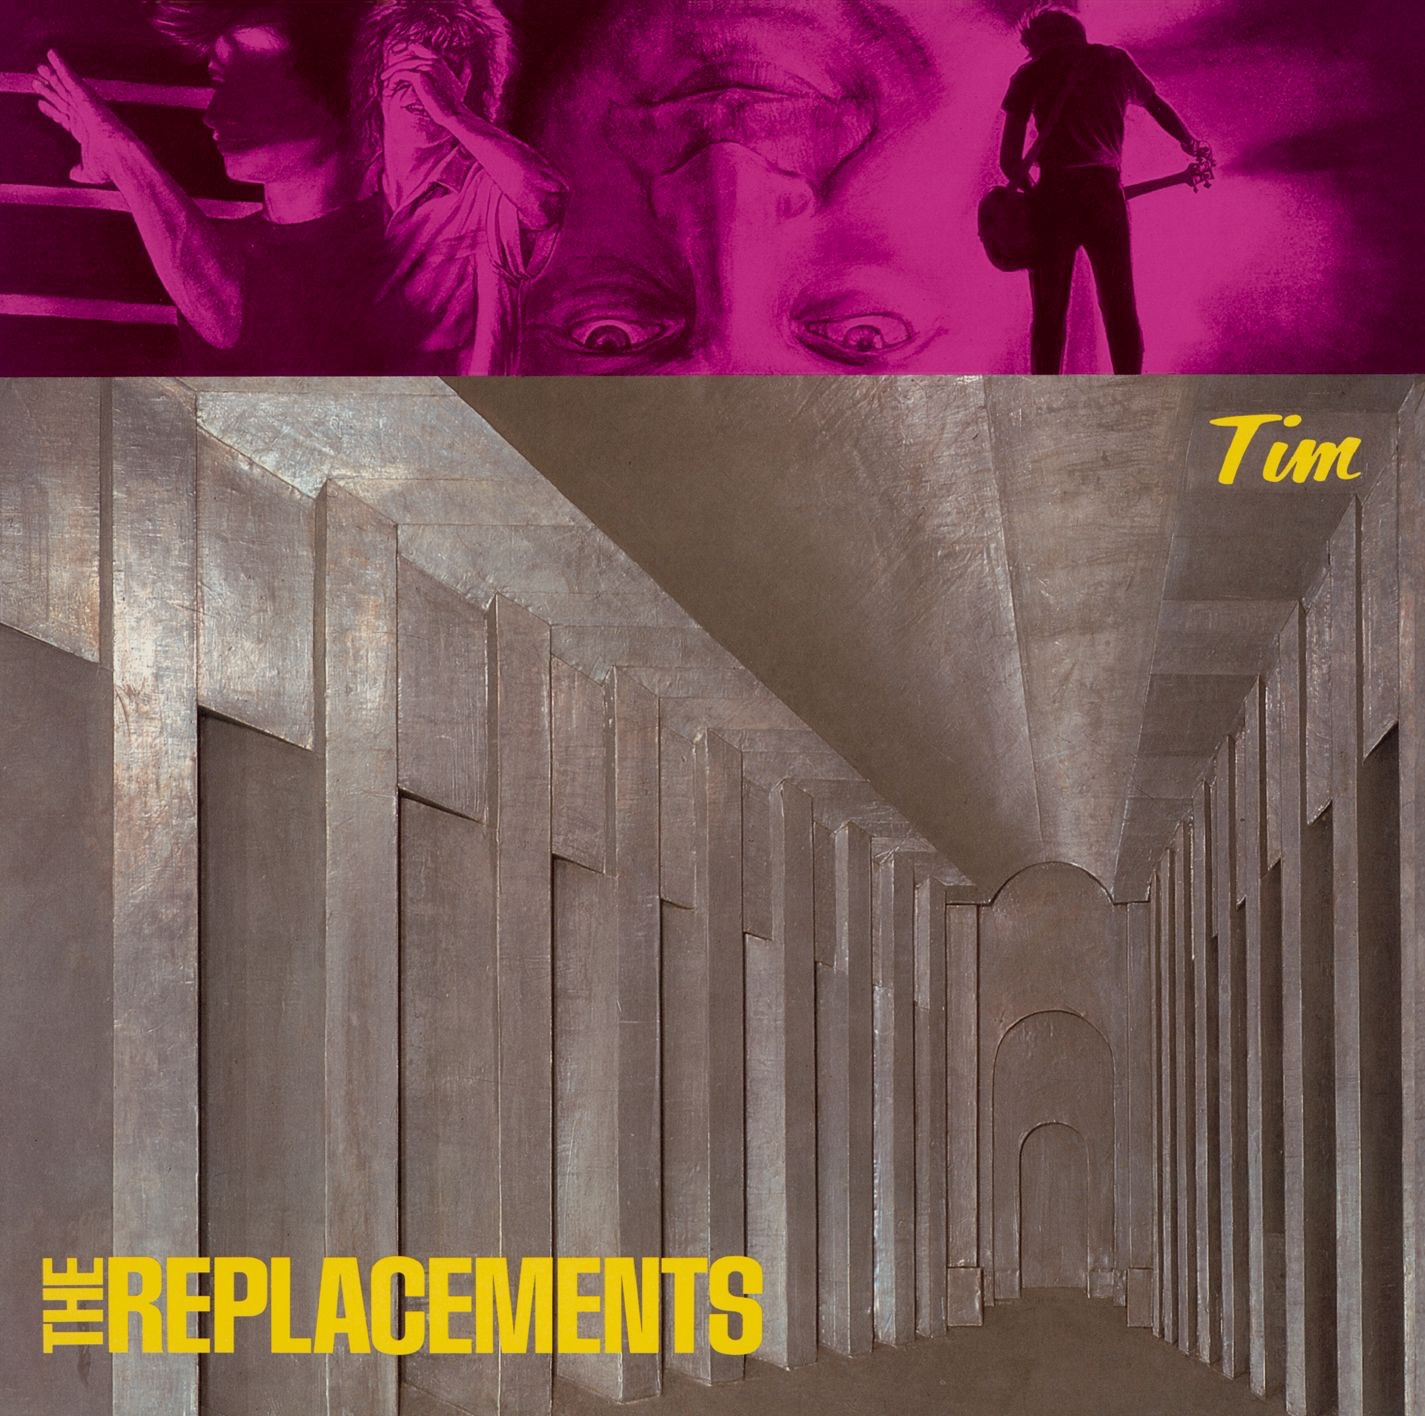 Art for Swingin Party by The Replacements